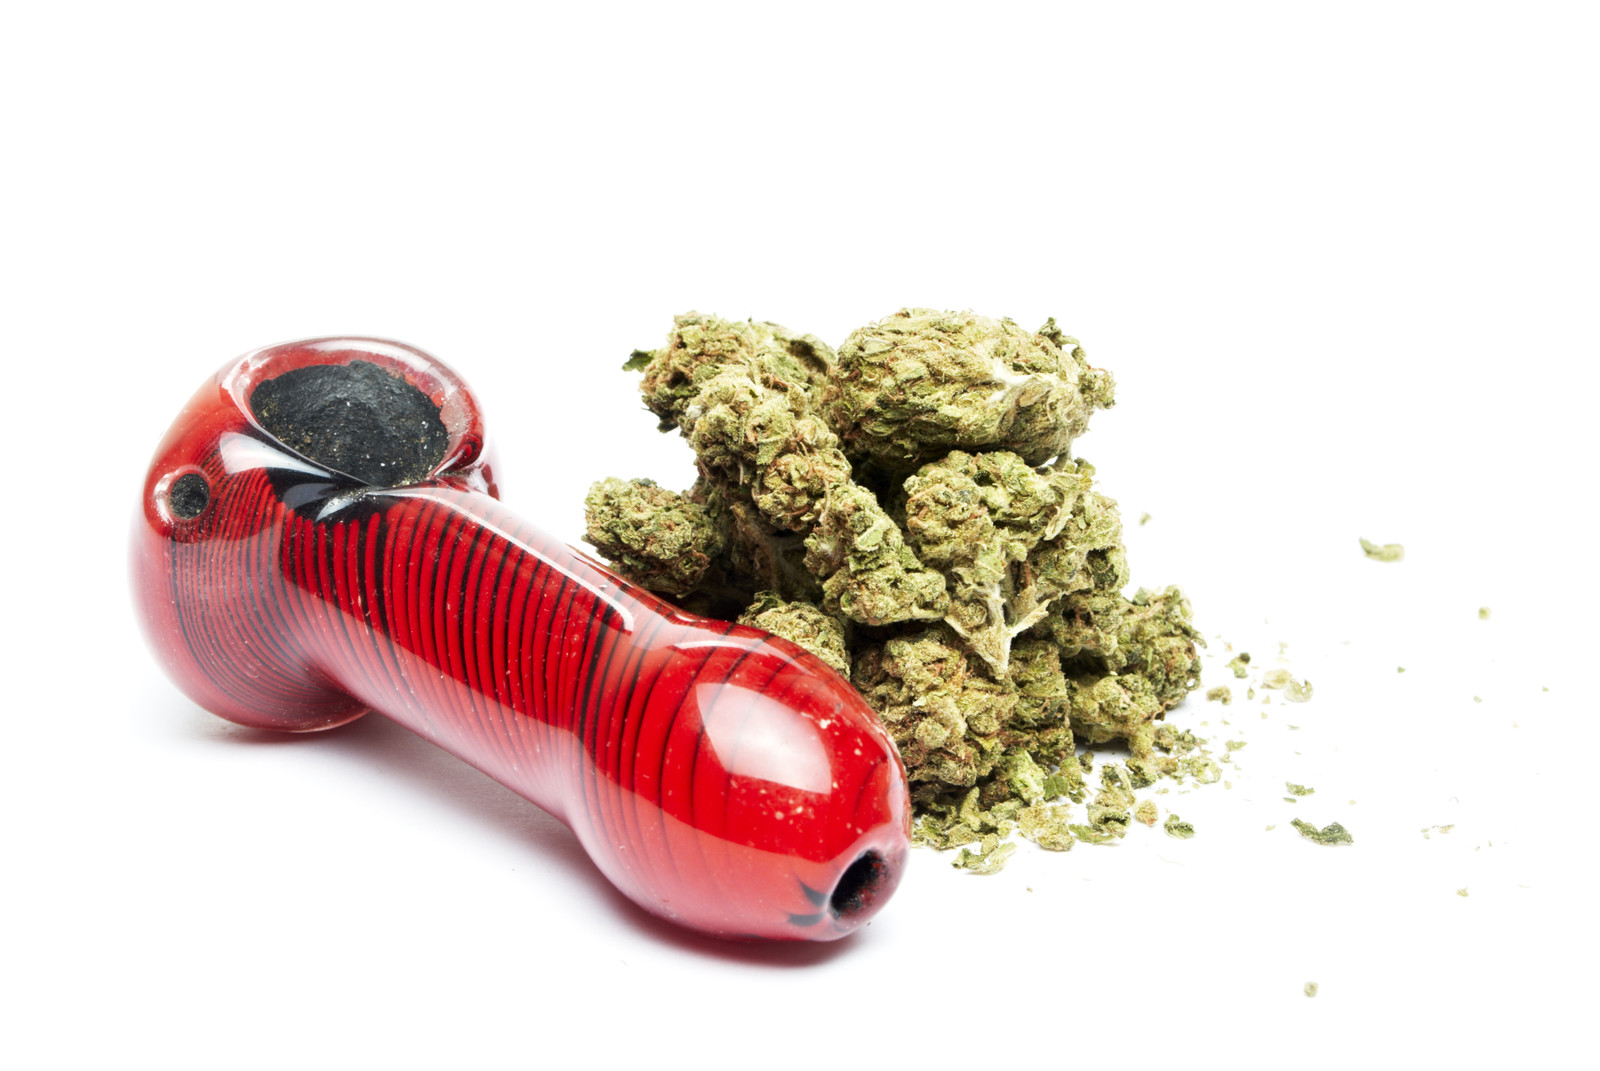 Cannabis and red pipe